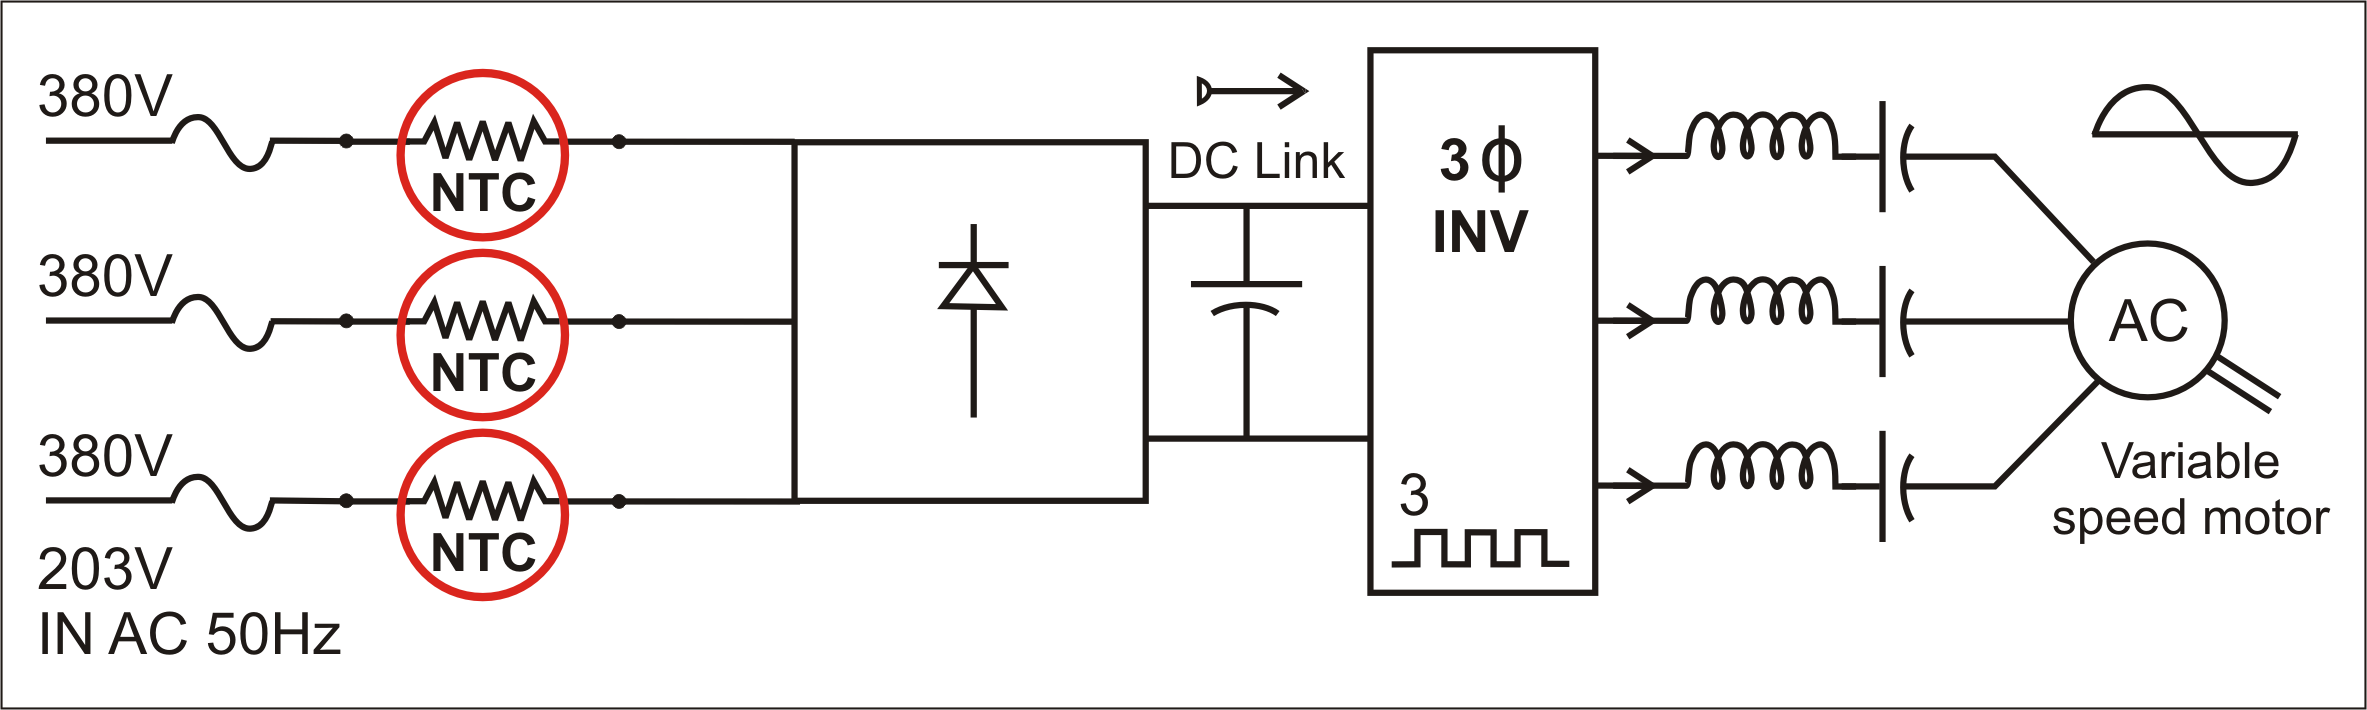 Figure 6 - Variable Frequency Drive